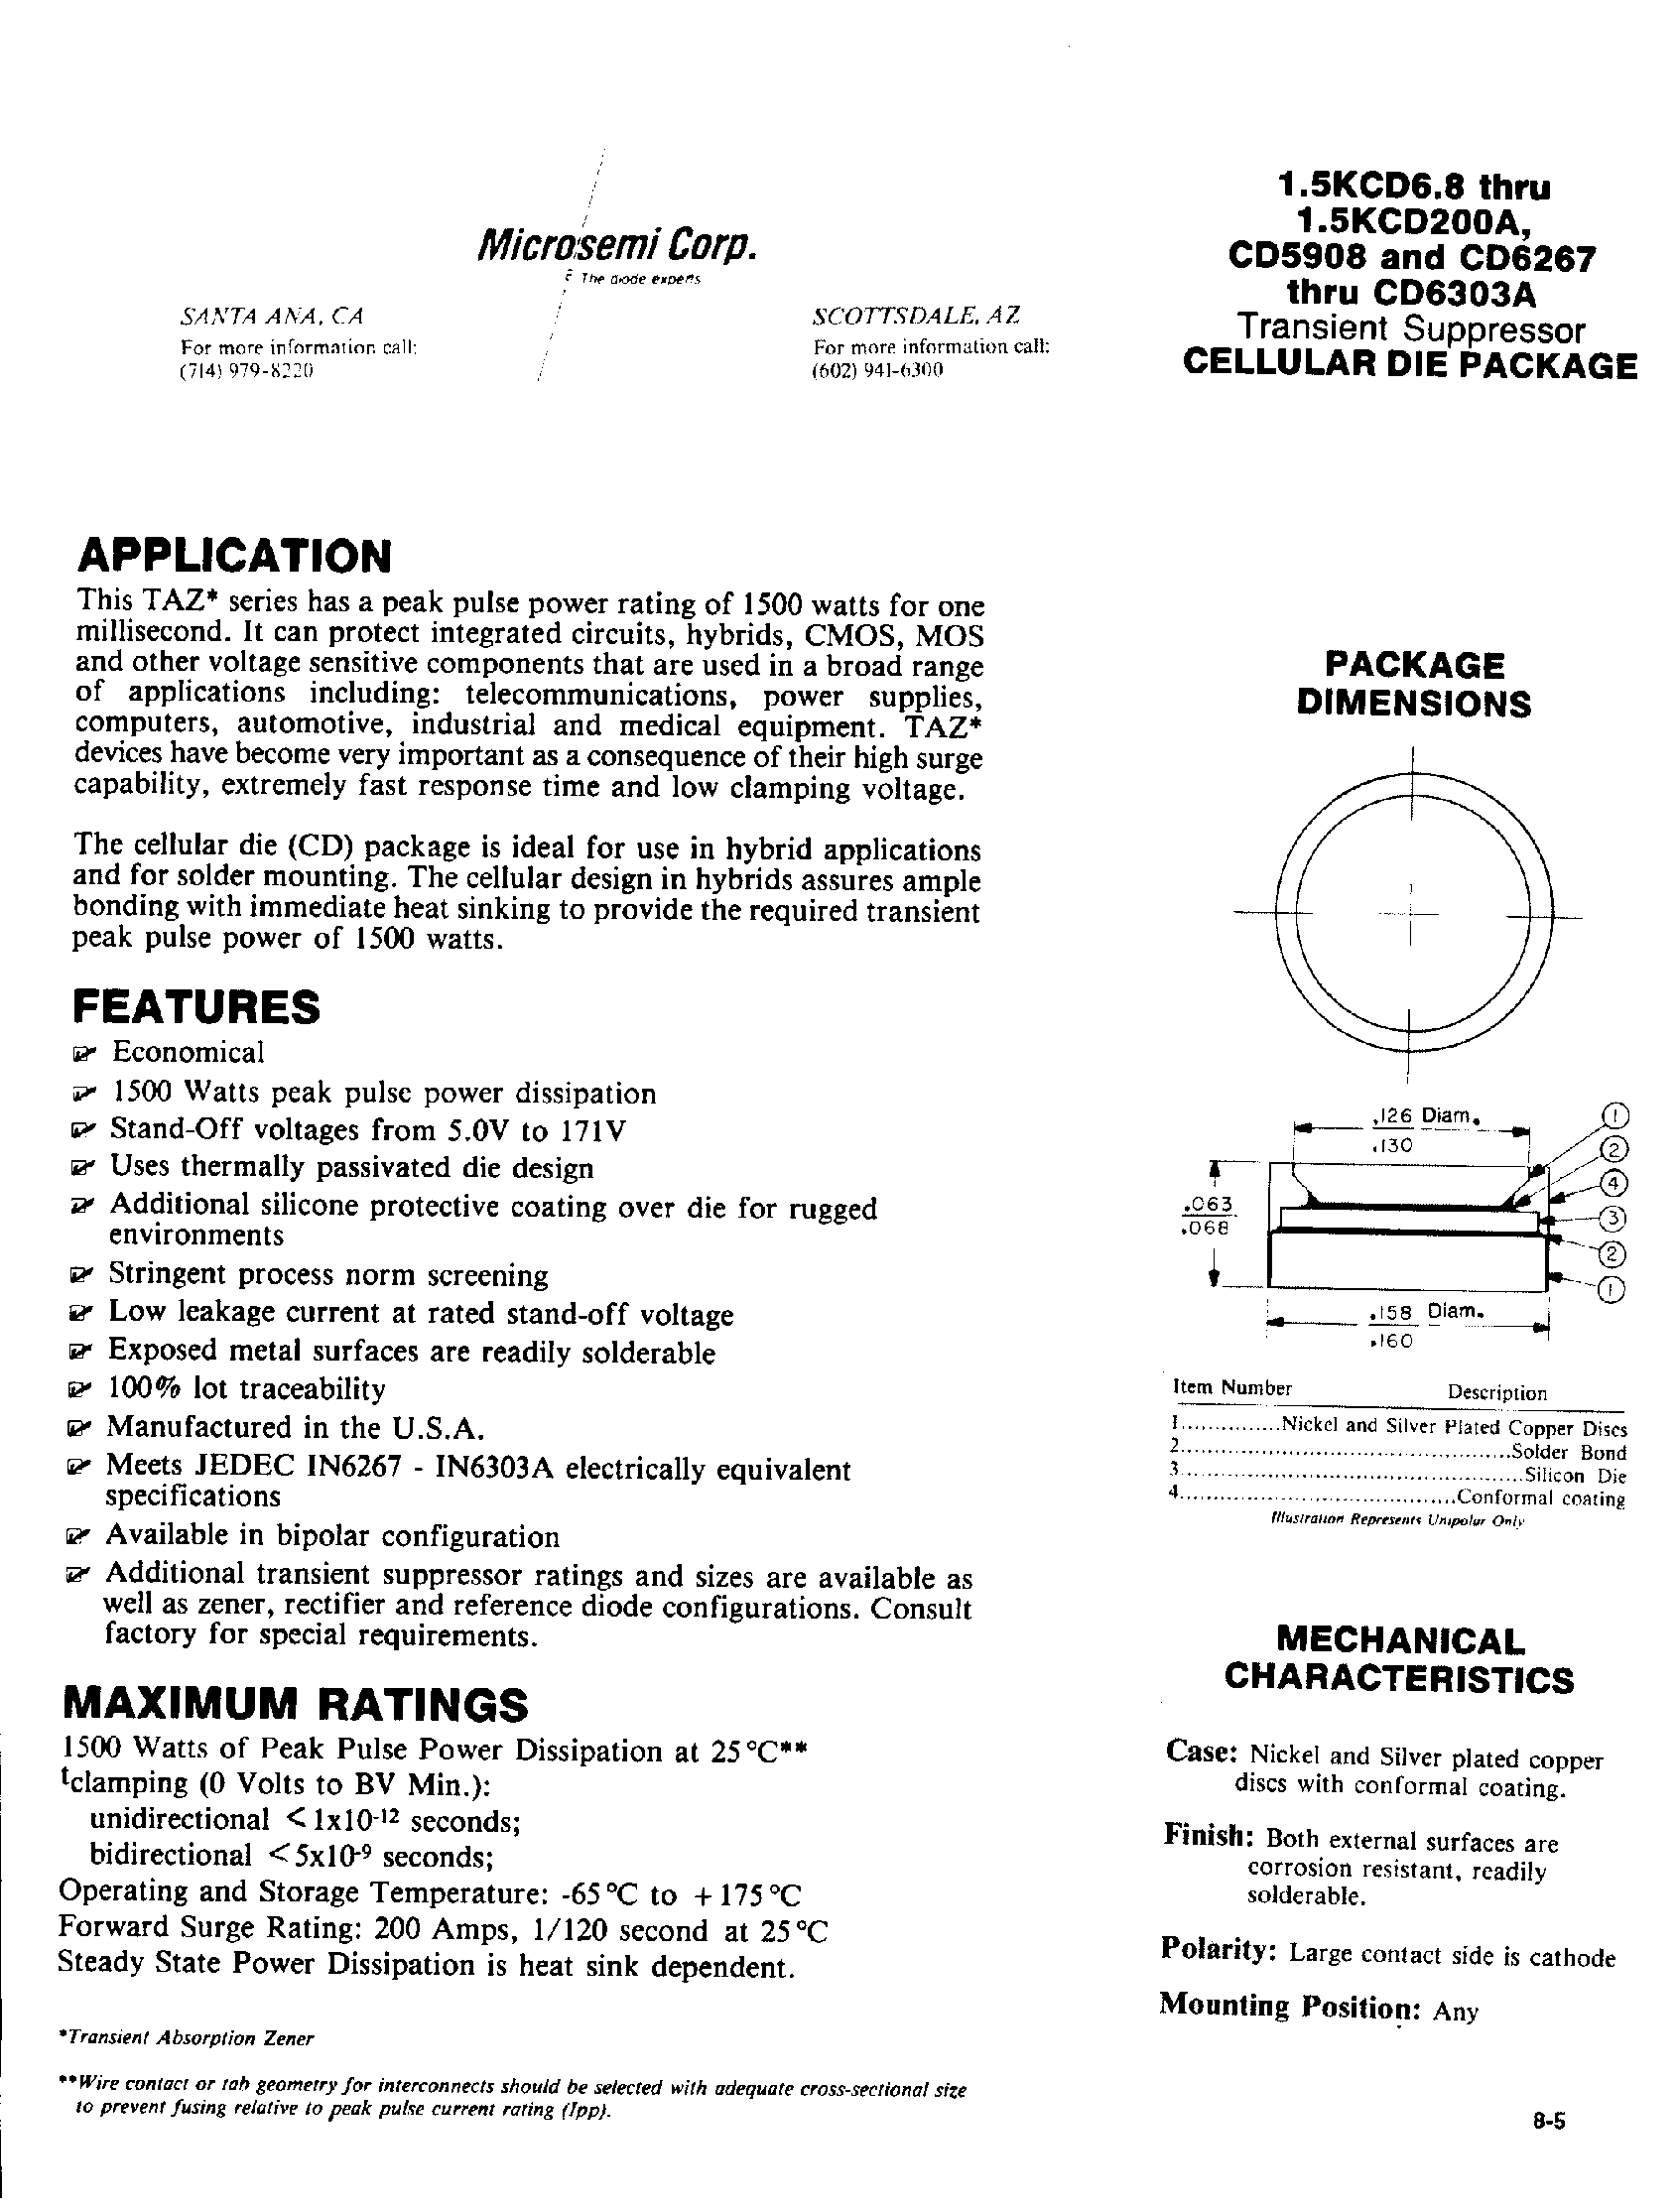 Datasheet CD6284A - Transient suppressor CELLULAR DIE PACKAGE page 1